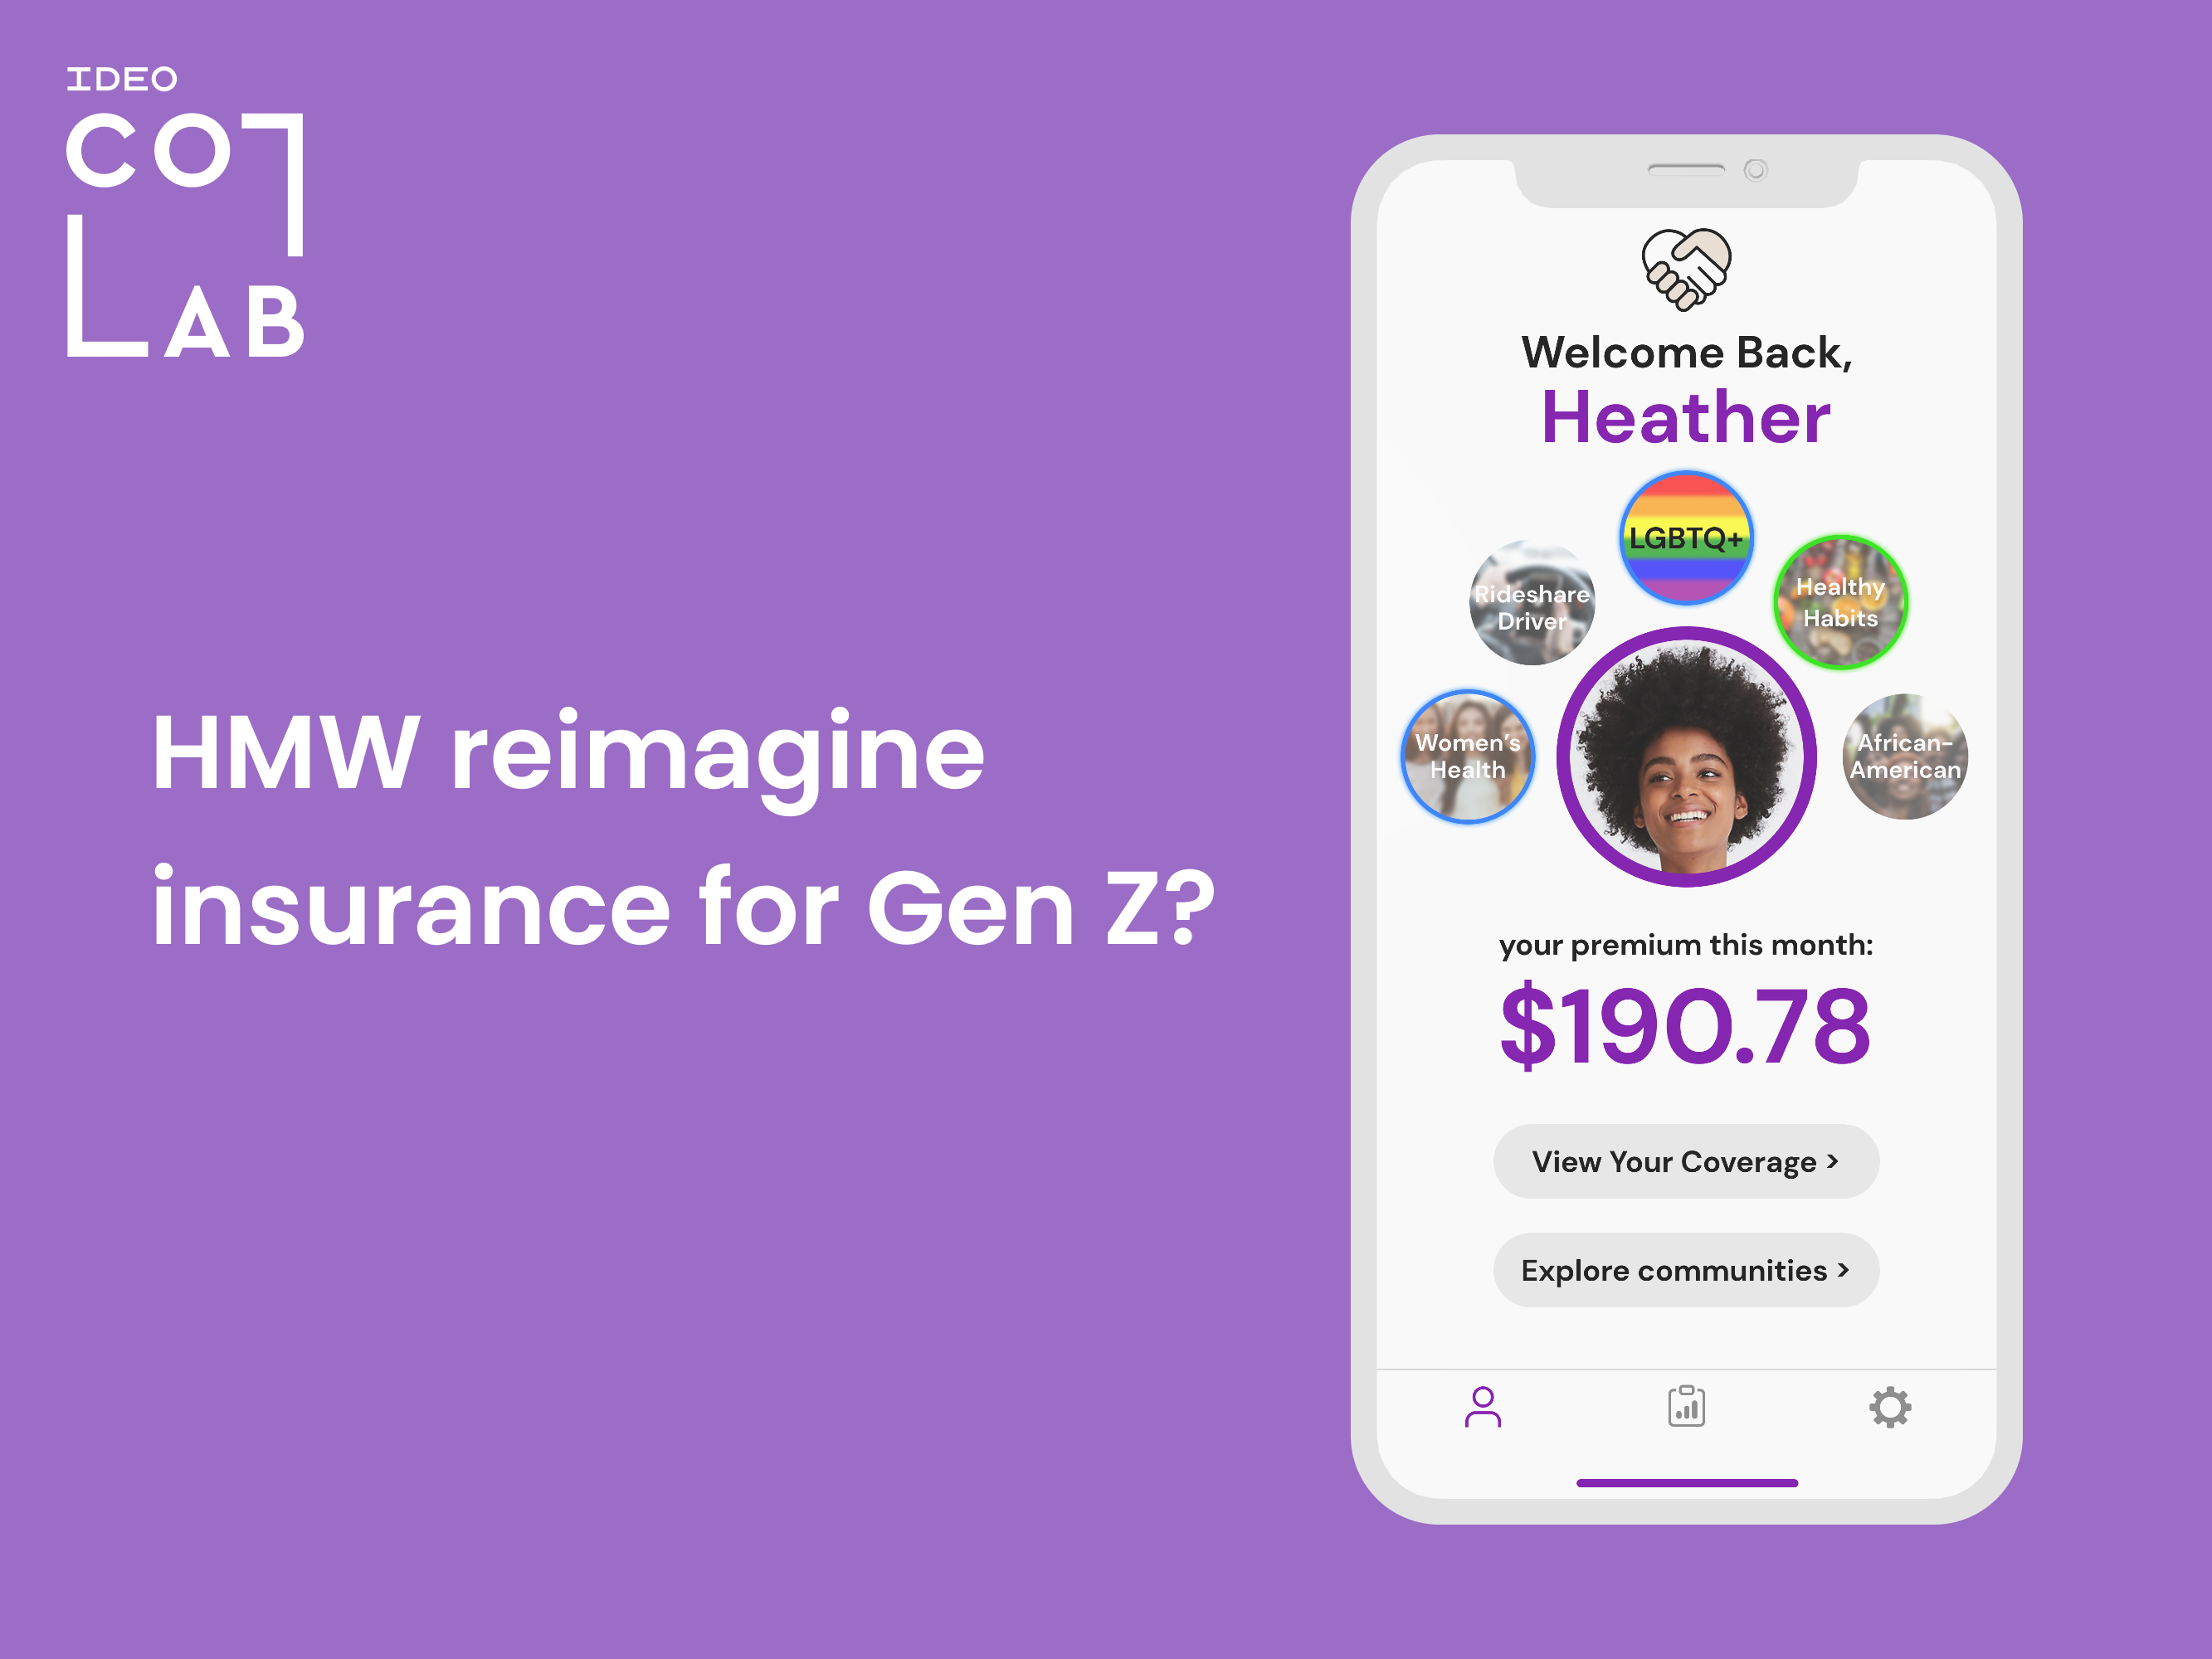 Stronger Together app user interface with text: 'HMW reimagine insurance for Gen Z?'